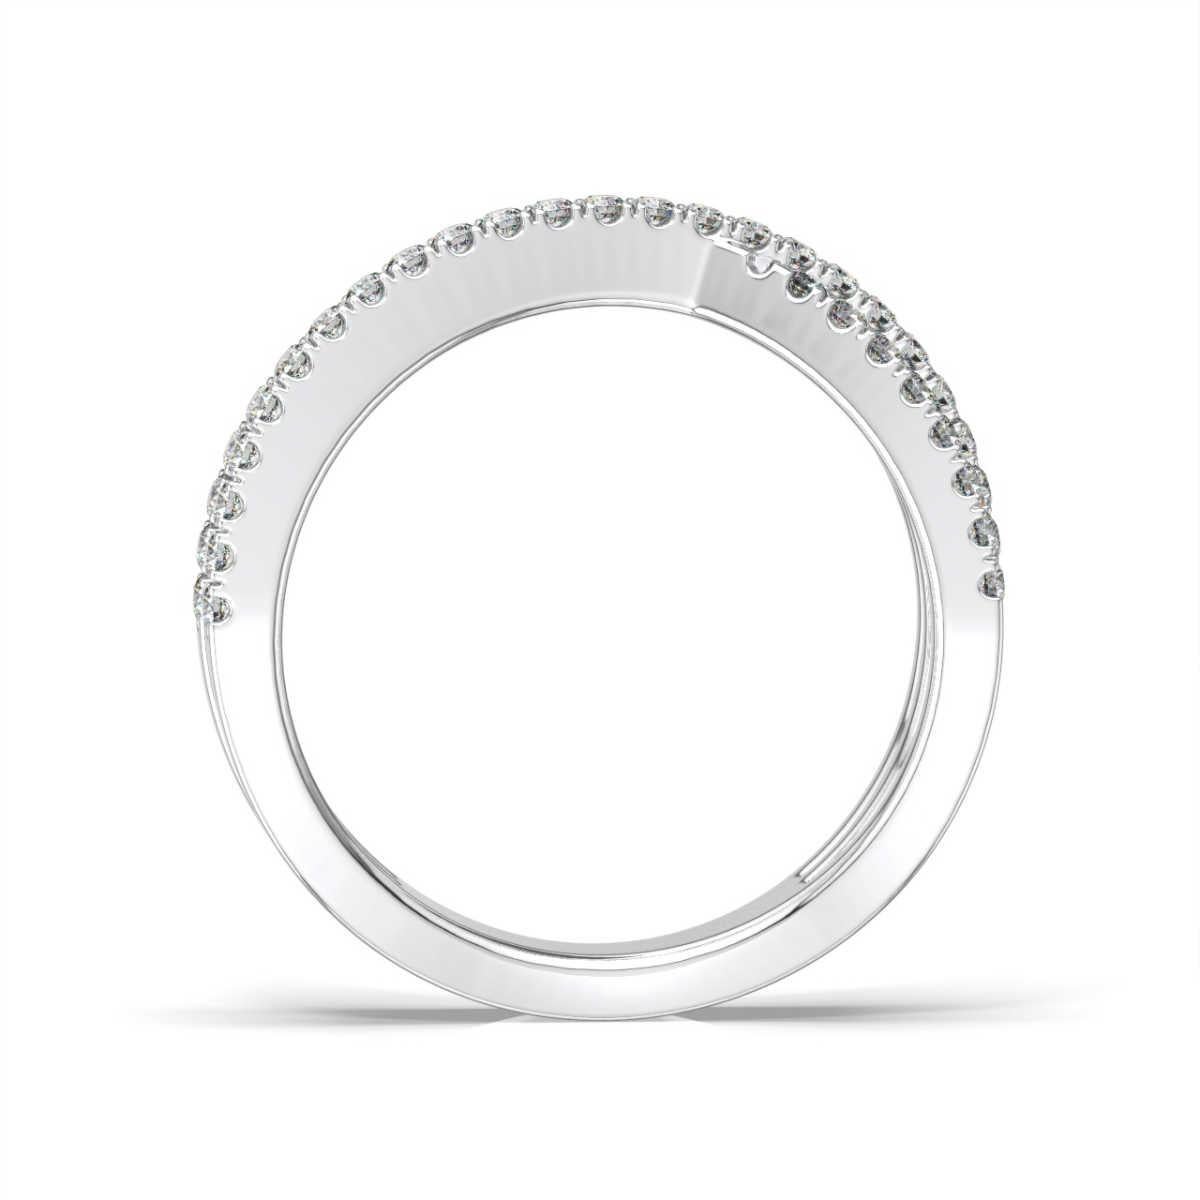 This contemporary, fashionable ring features three rows of Interweave Micro Prongs set diamonds.

Product details: 

Center Gemstone Color: WHITE
Side Gemstone Type: NATURAL DIAMOND
Side Gemstone Shape: ROUND
Metal: 14K White Gold
Metal Weight: